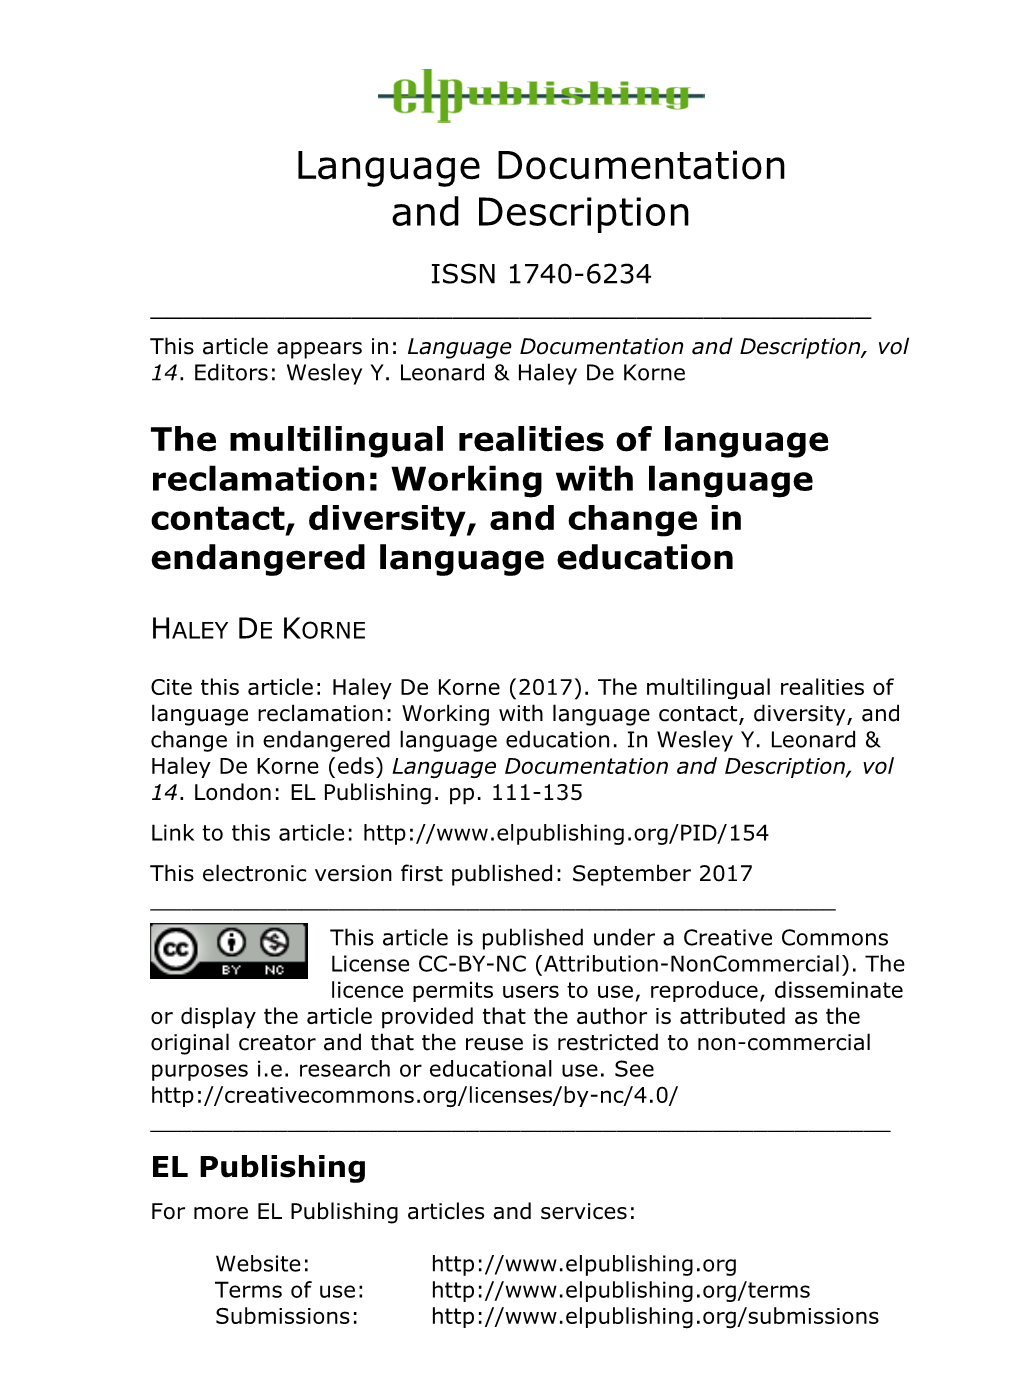 The Multilingual Realities of Language Reclamation: Working with Language Contact, Diversity, and Change in Endangered Language Education